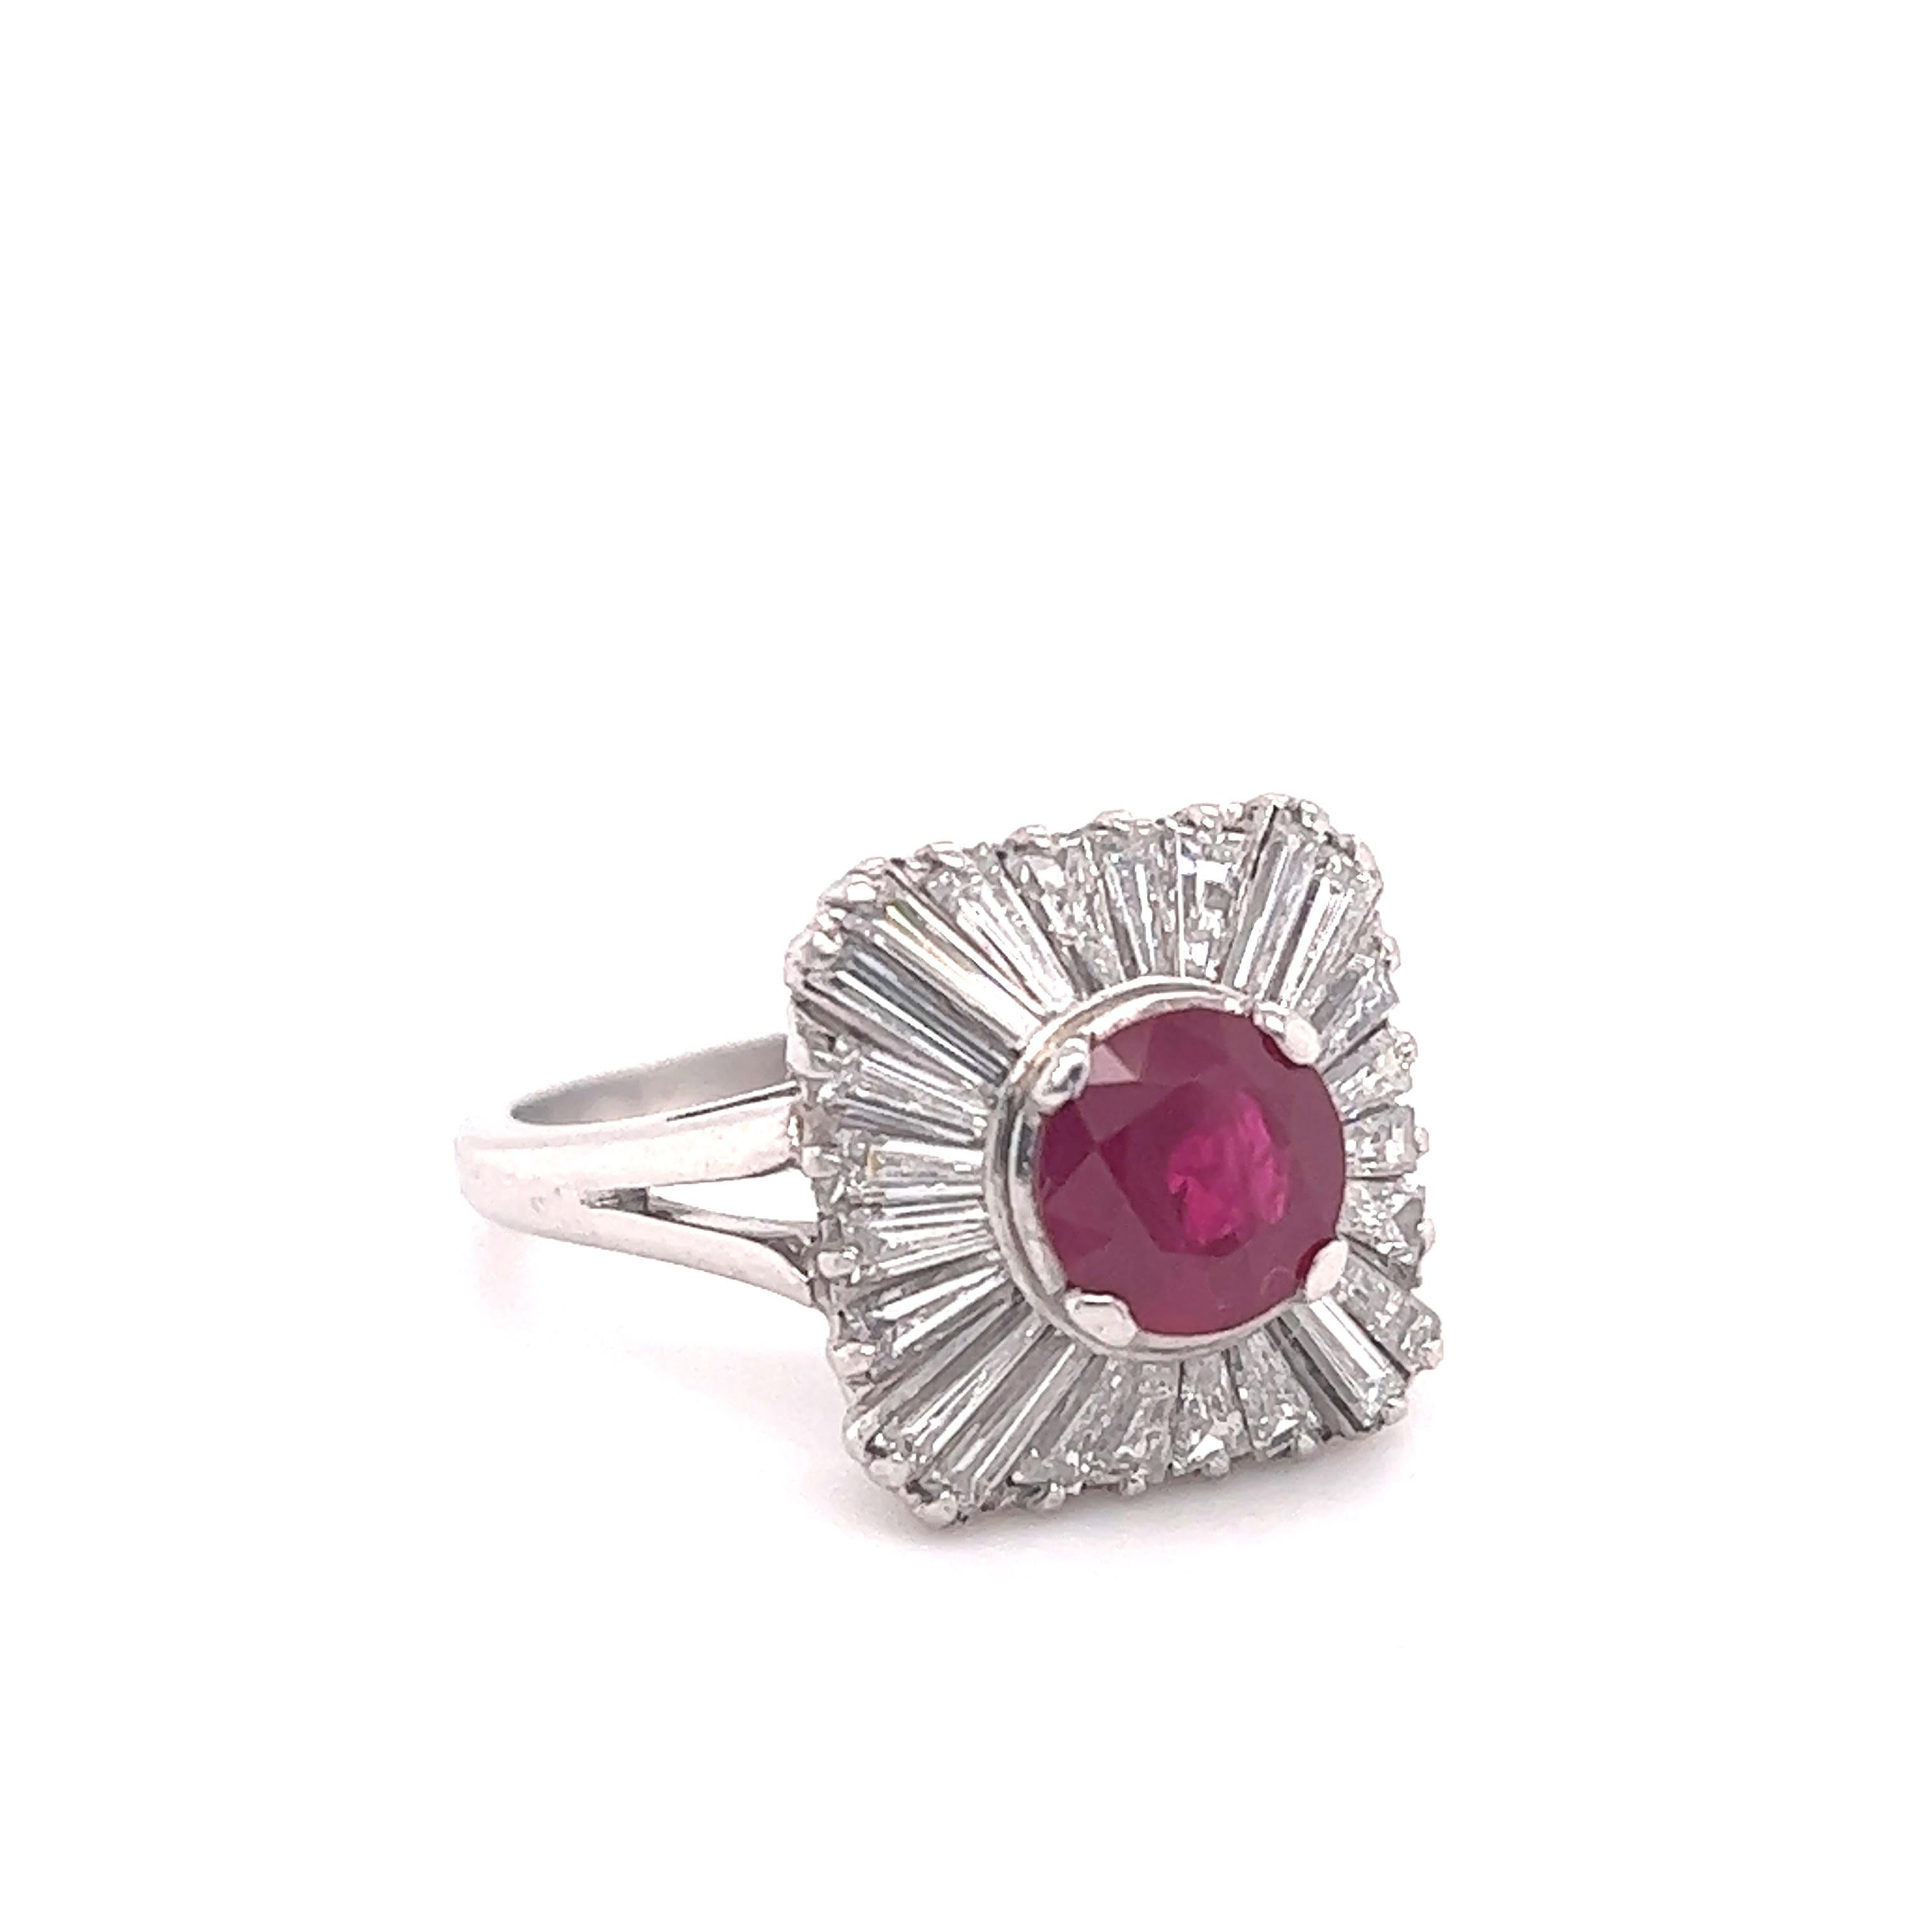 Elegant design seen on this estate masterpiece. This ring is crafted in platinum and shows baguette diamonds and a vibrant red color ruby gemstone. The design of the ring is known as a ballerina ring and is inspired by the shape of a ballerina's